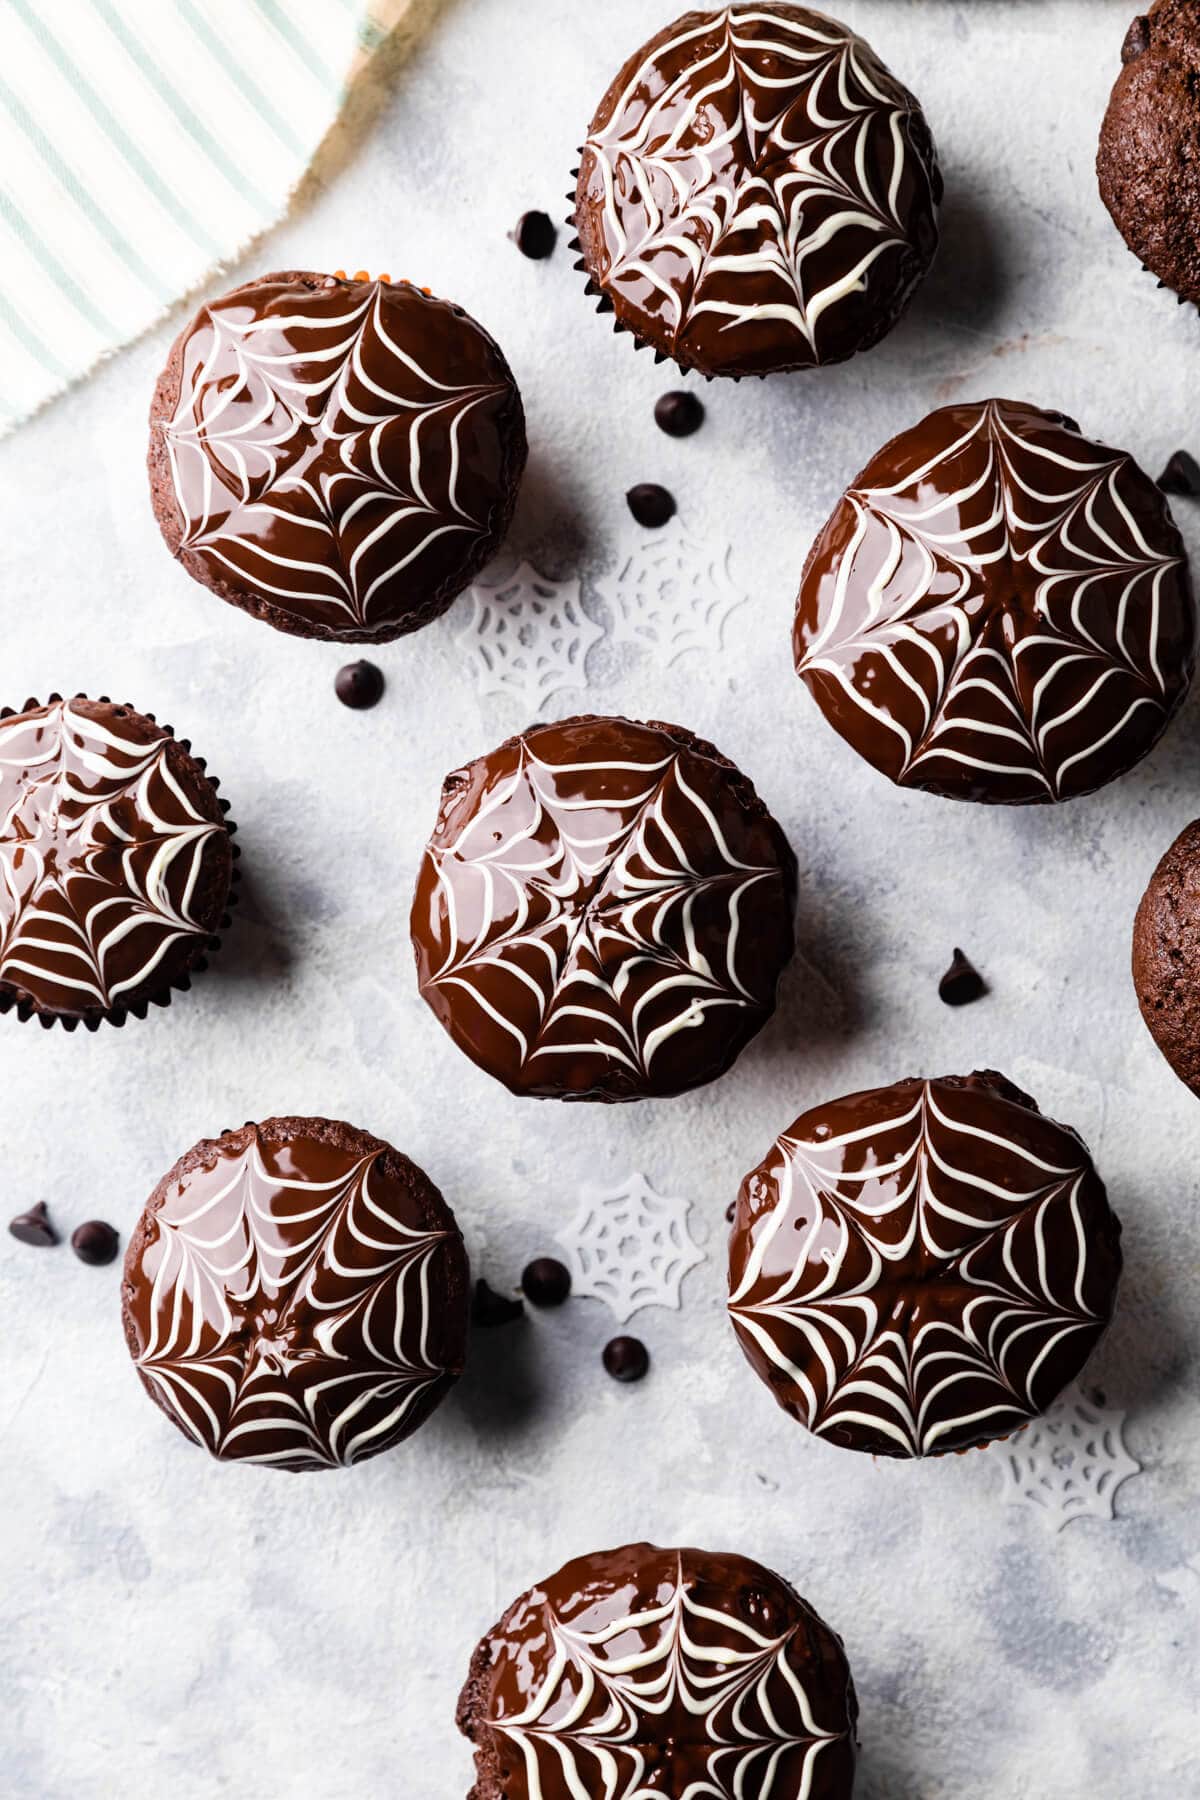 batch of chocolate fudge muffins with spiderweb decorations on top.